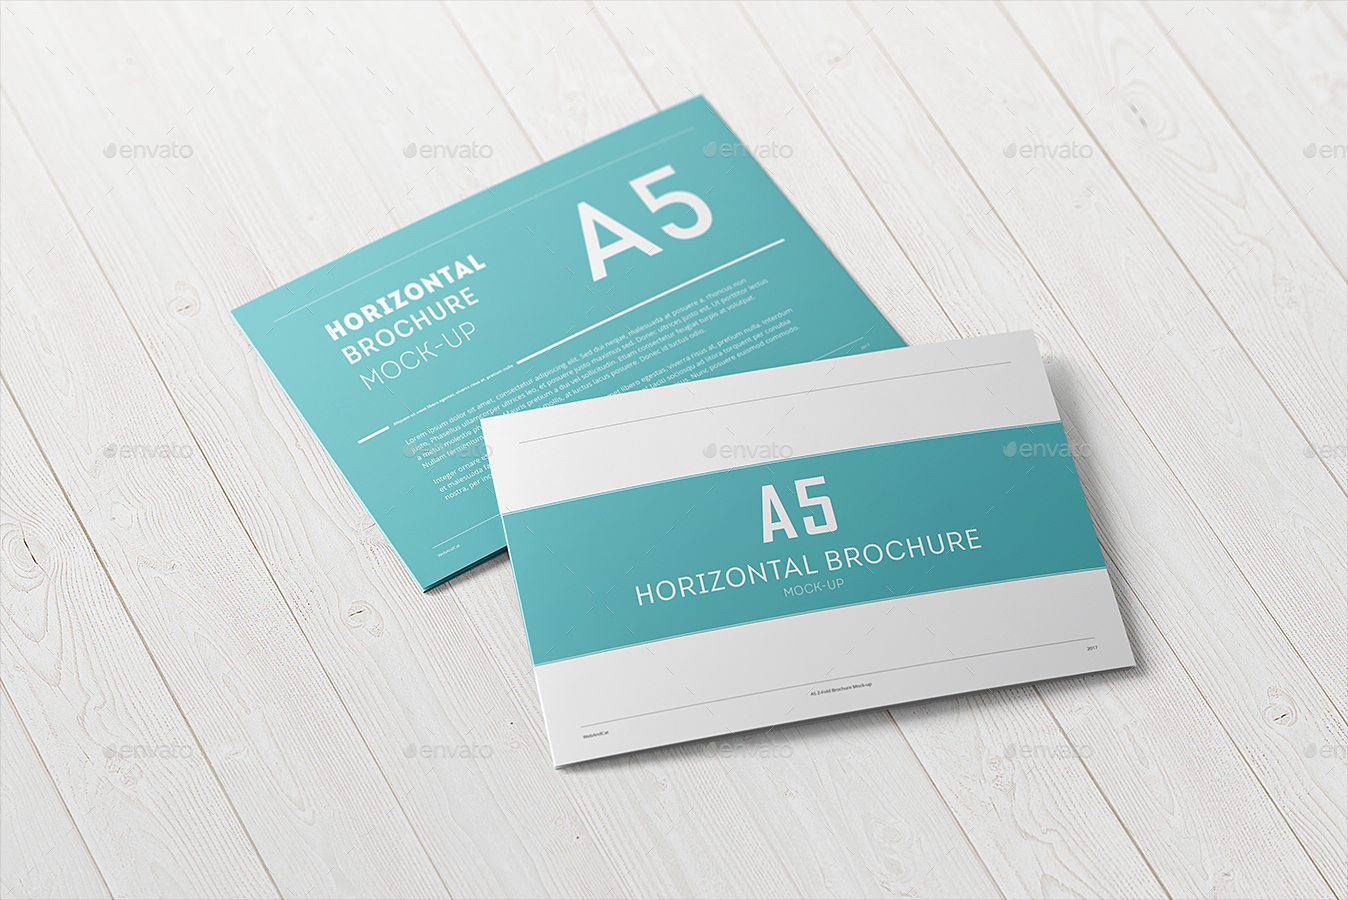 Download A5 Tri-Fold Horizontal Brochure Mock-up by webandcat | GraphicRiver